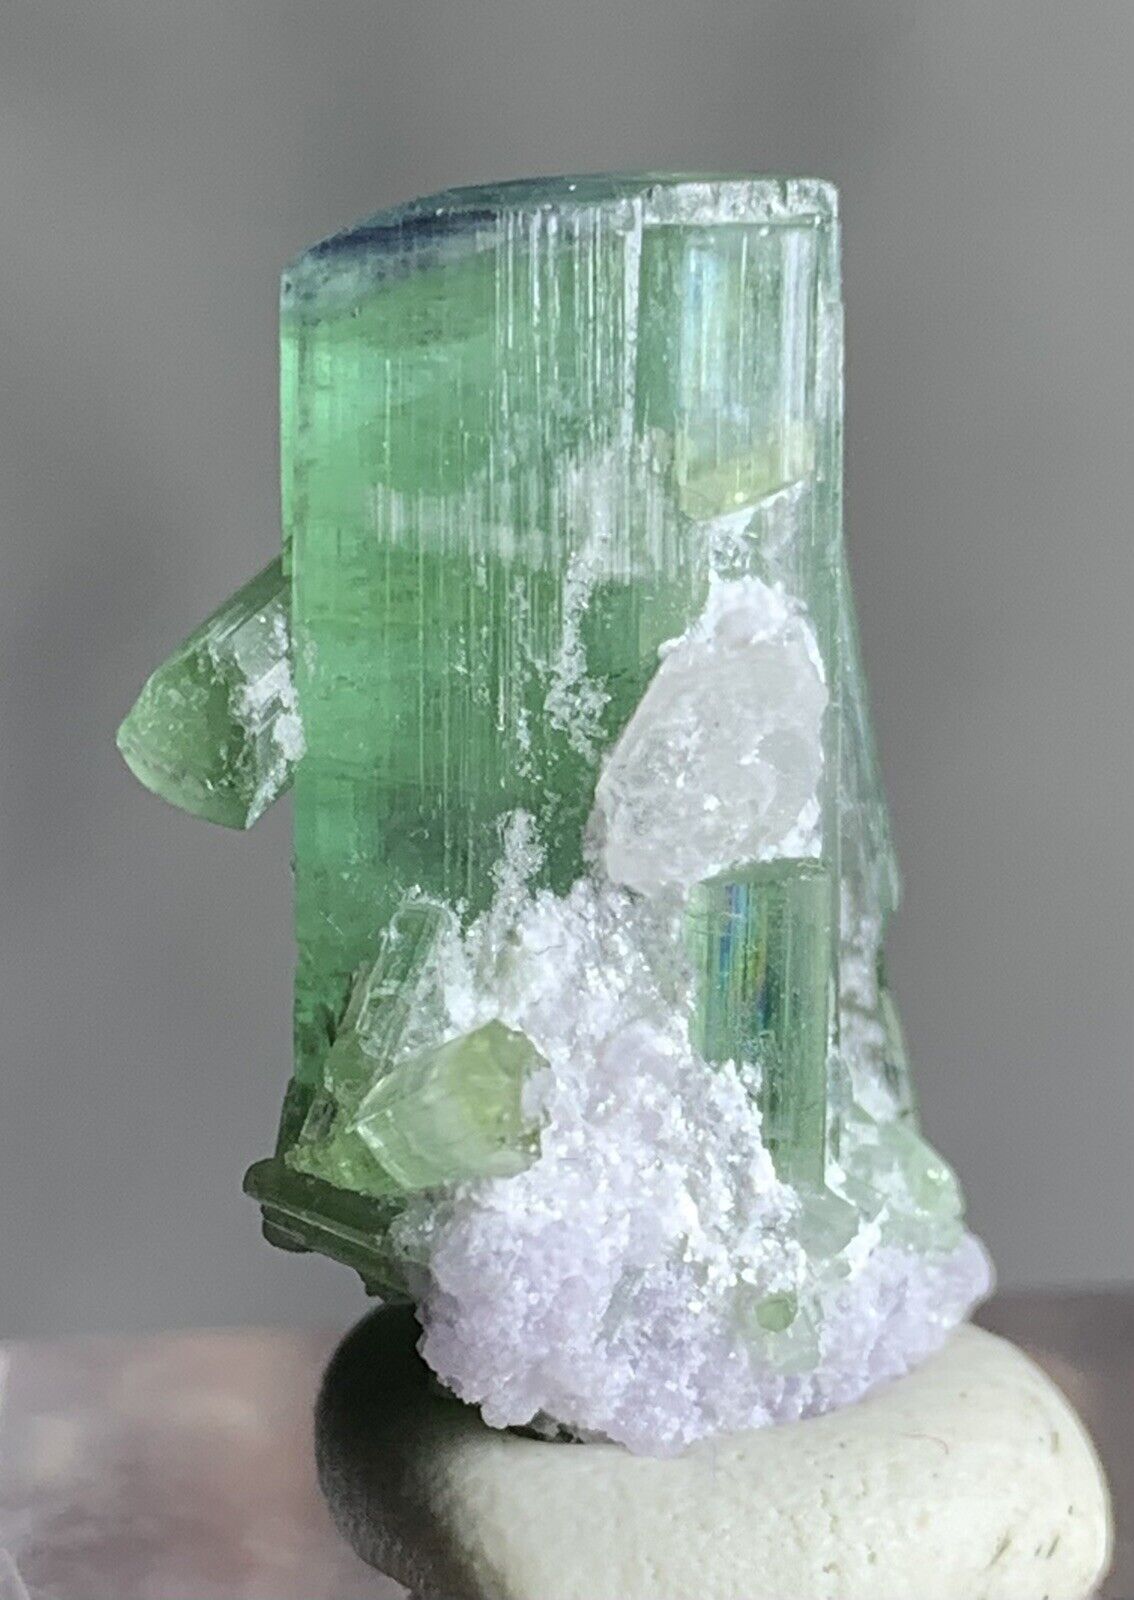 14 Carats Beautiful Lustrous Tourmaline Specimen From Afghanistan